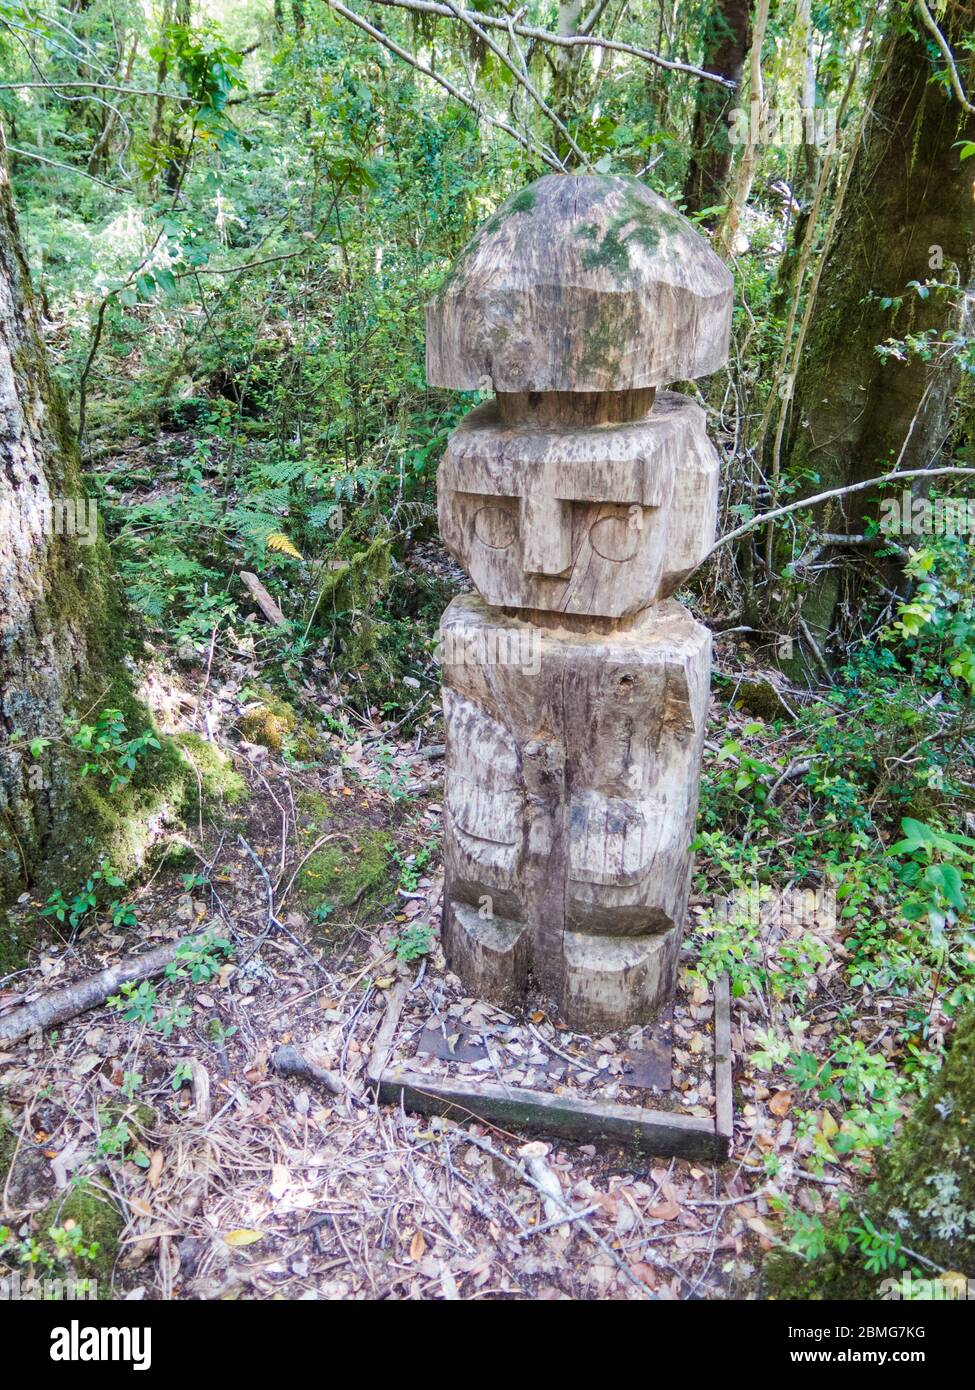 Wooden statue, in the middle of the Huilo Huilo Biological Reserve, regressing animals and Mapuche mystical characters from southern Chile. Los Ríos R Stock Photo